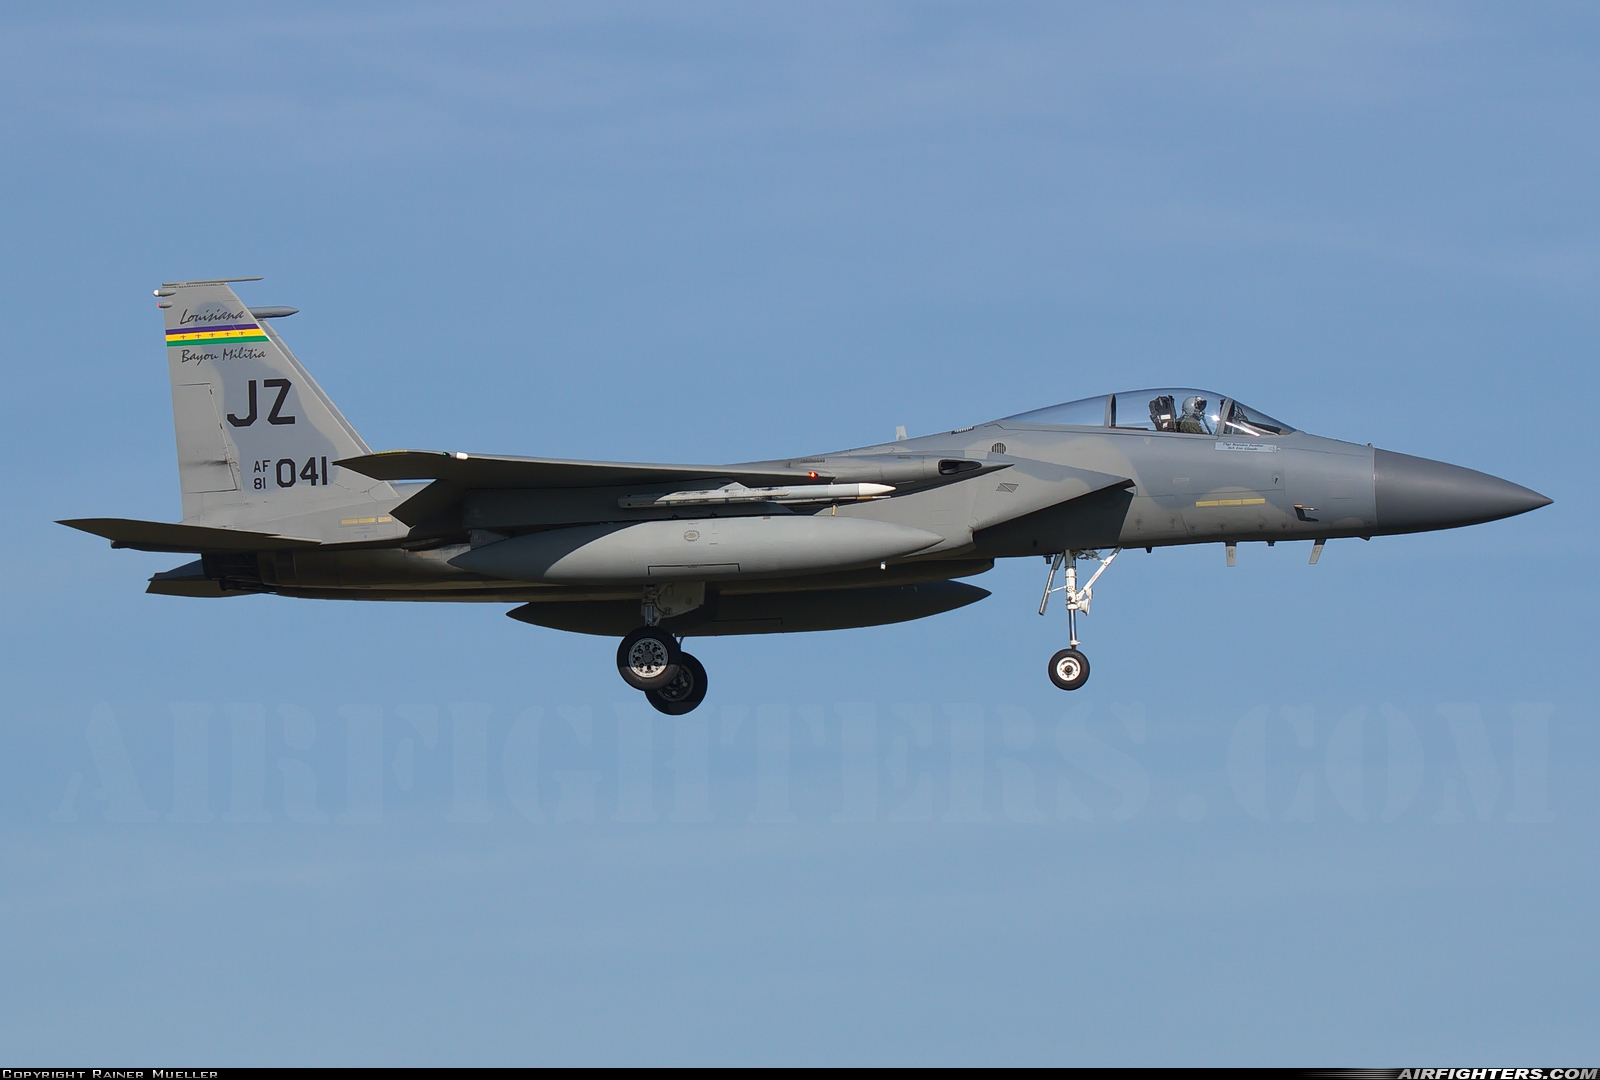 USA - Air Force McDonnell Douglas F-15C Eagle 81-0041 at In Flight - Refueling Track TRA3 and 6, Netherlands